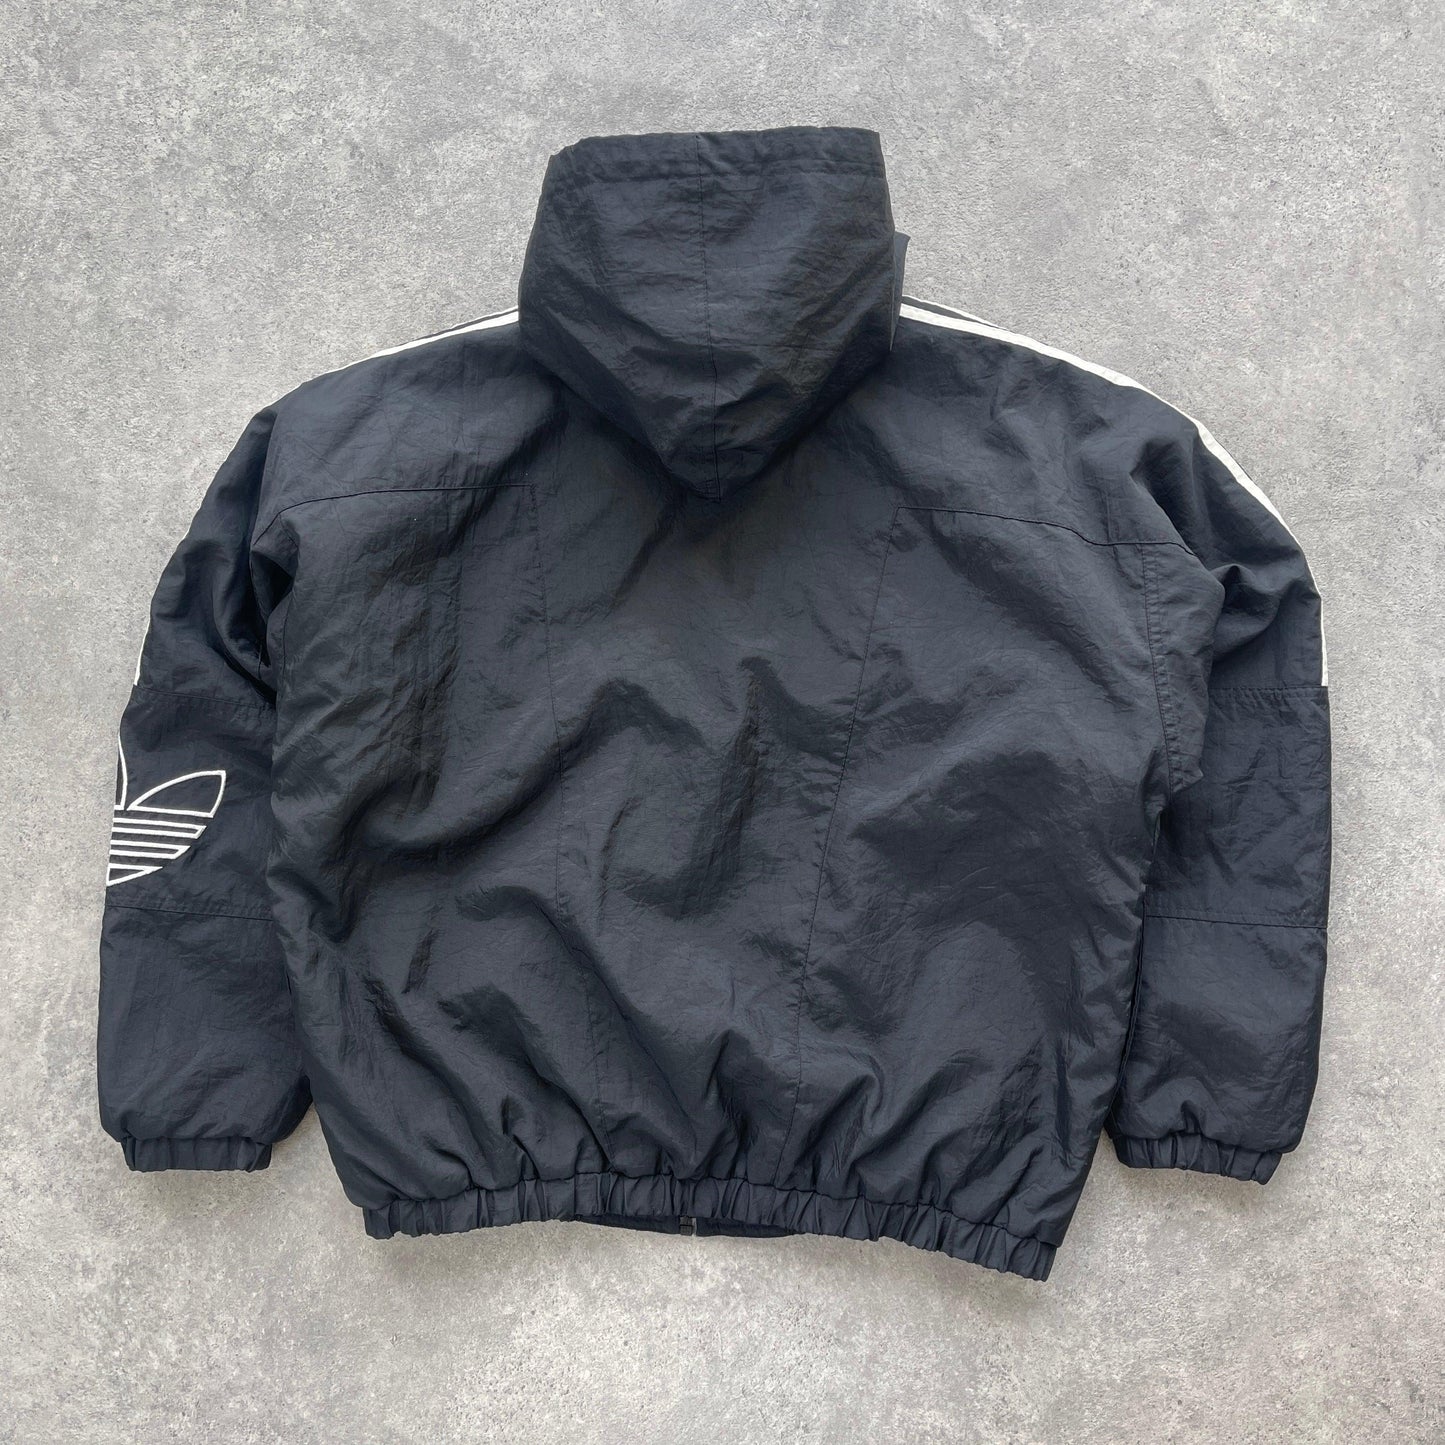 Adidas 1990s padded spellout bomber jacket (M) - Known Source